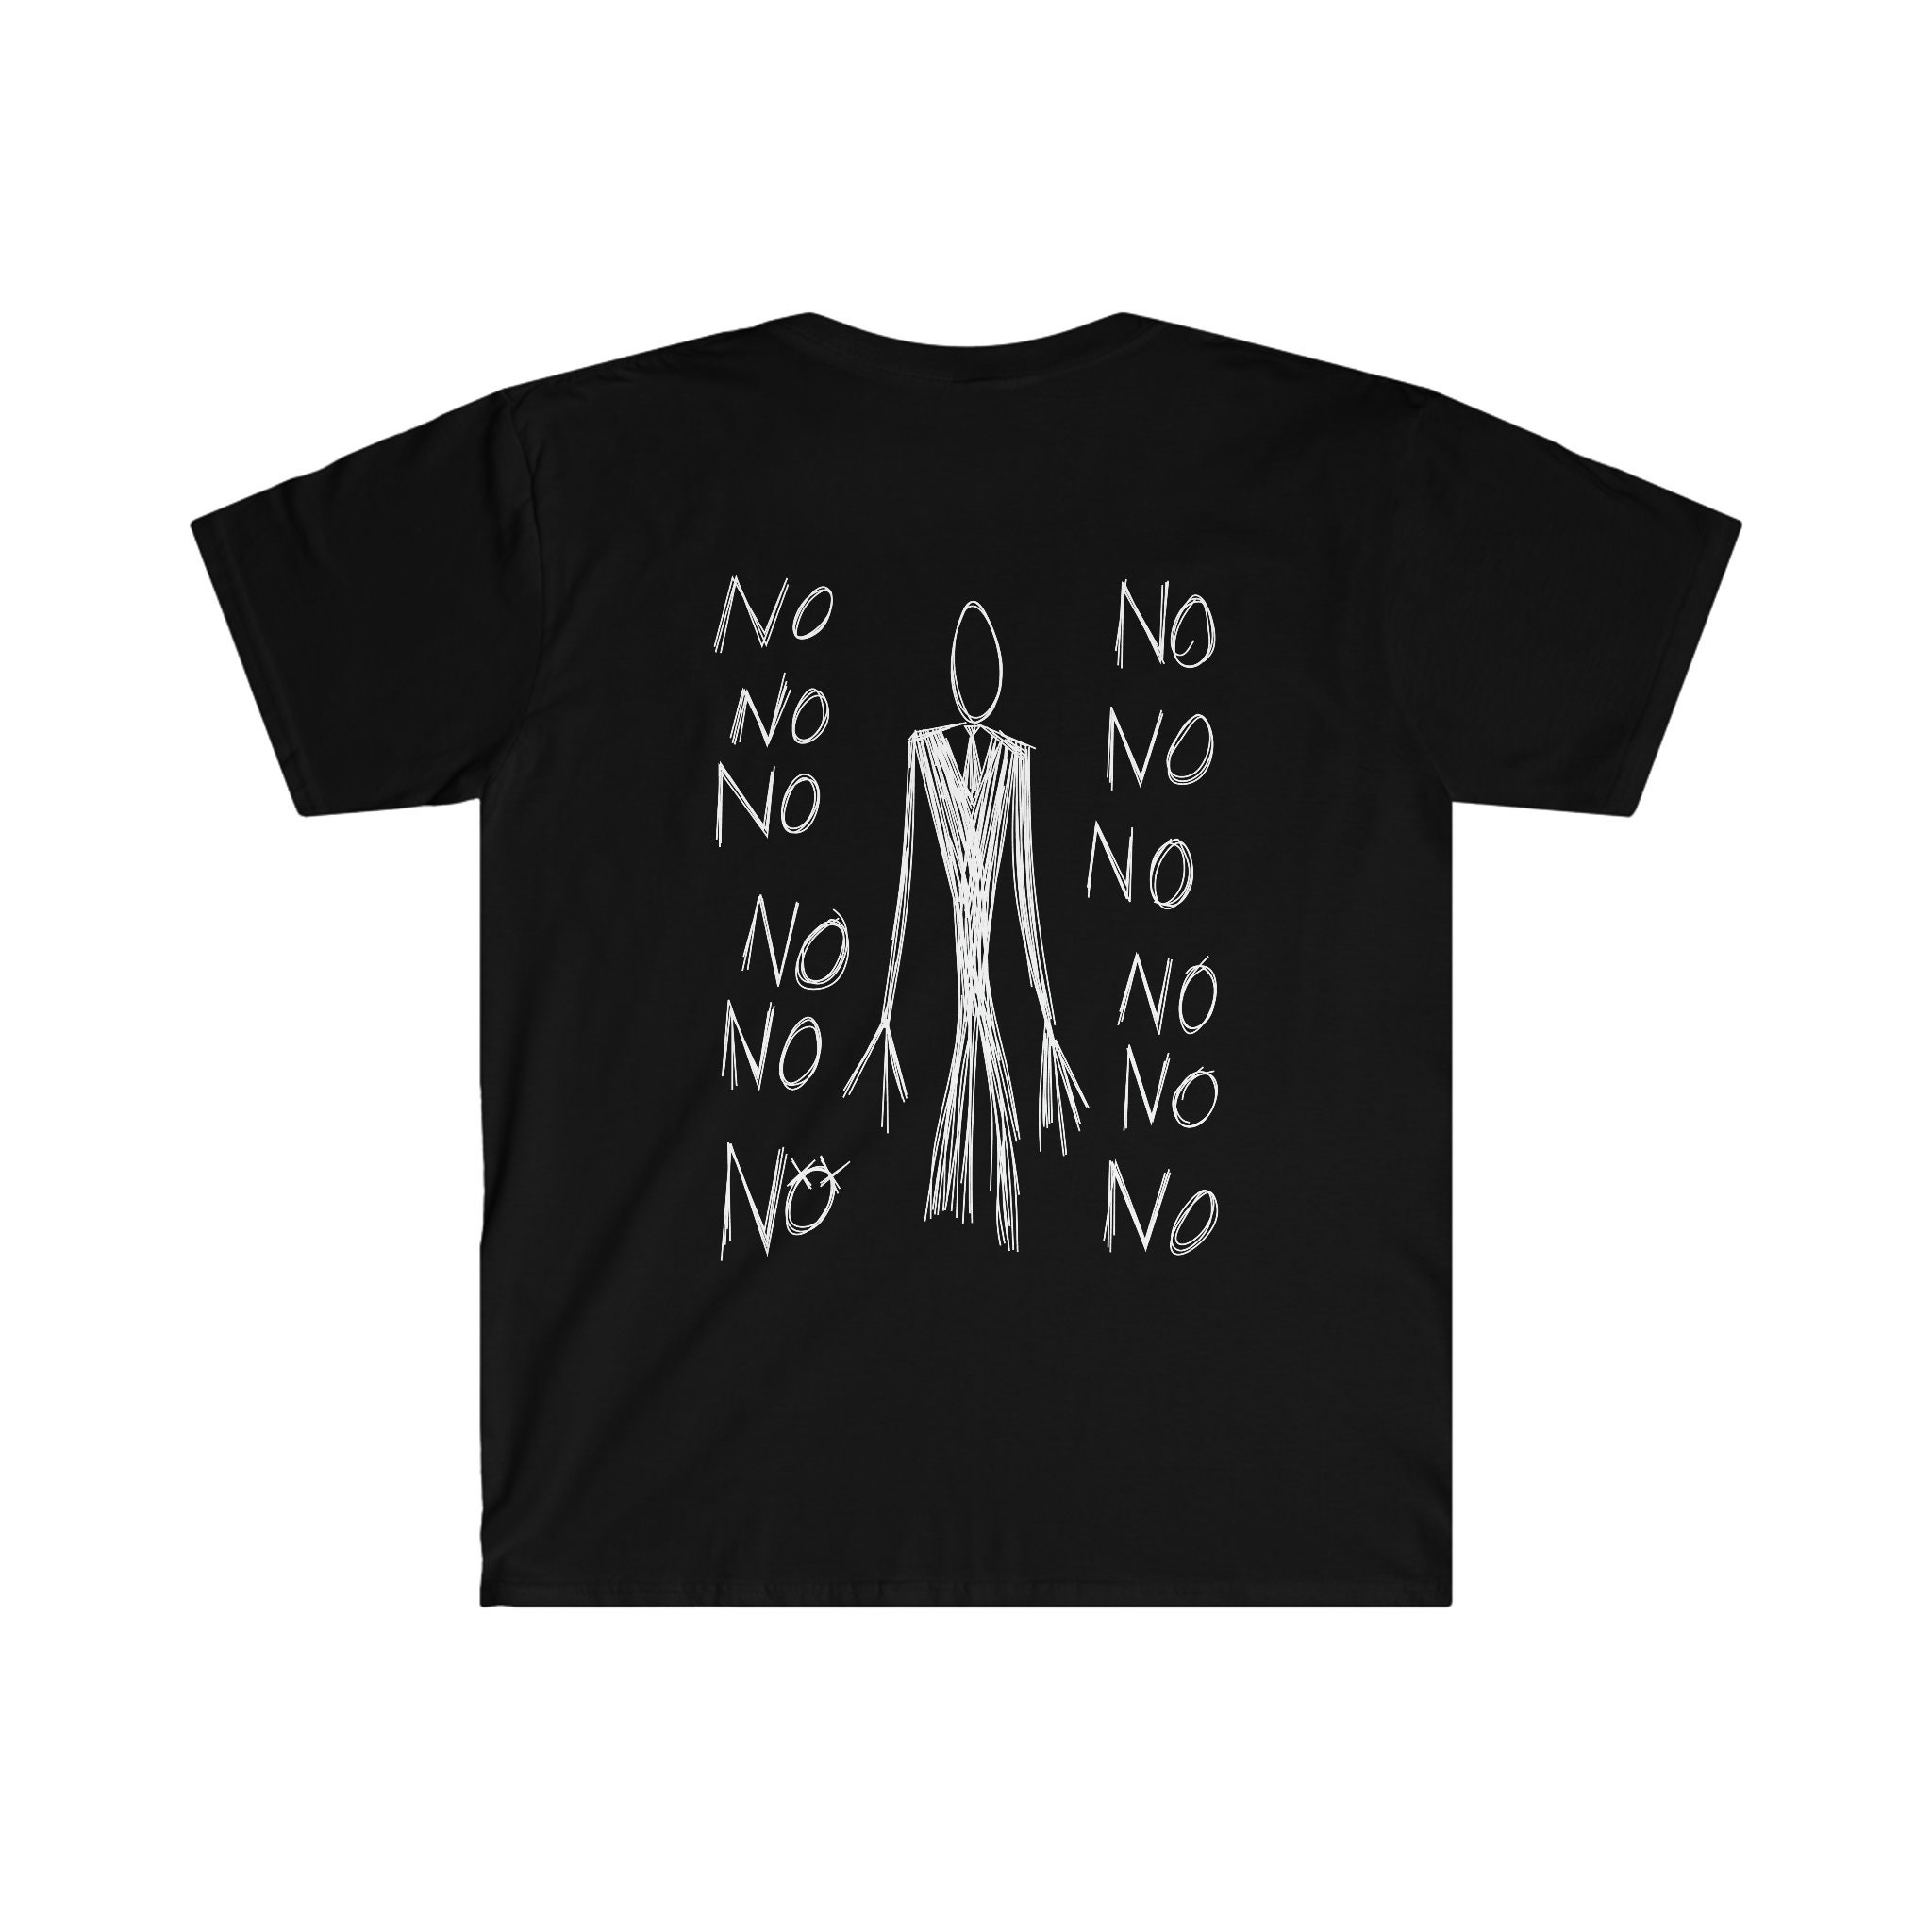 ColdPaperpeper3908 on X: Who hates slender and copy n pastes? Well I have  this shirt.  / X